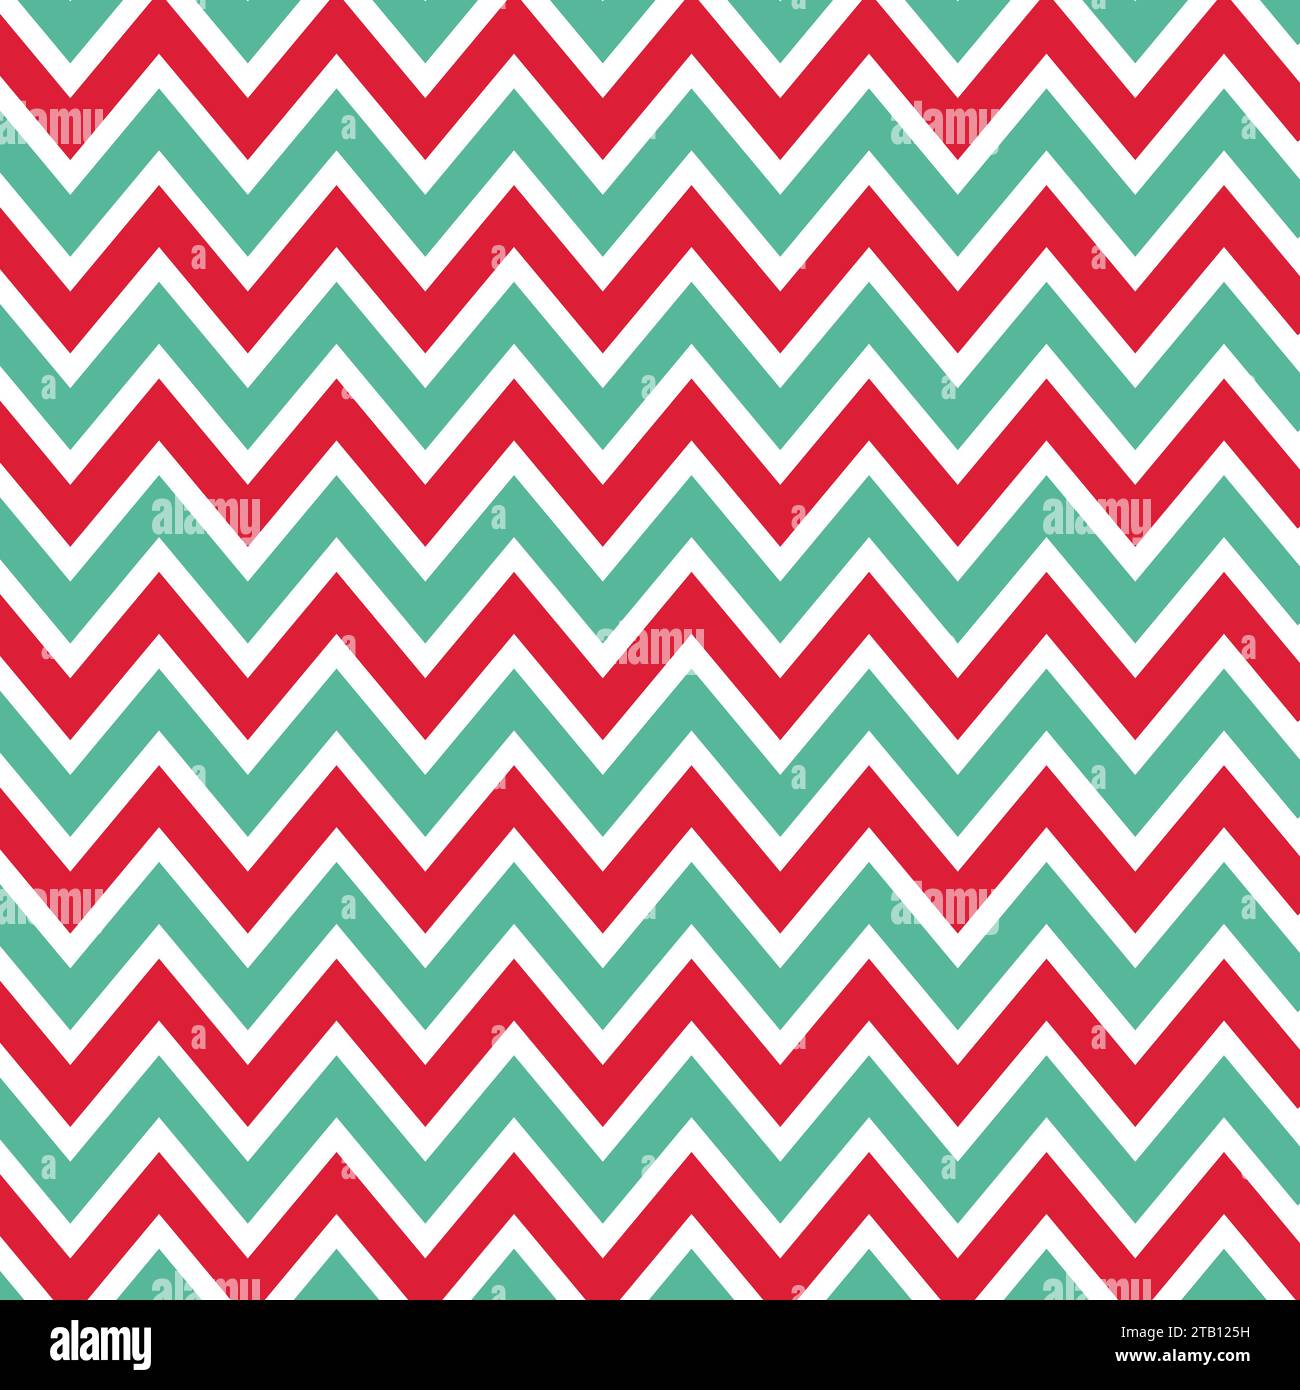 Trendy Chevron Patterned Background Red And White Stock Photo, Picture and  Royalty Free Image. Image 11451924.